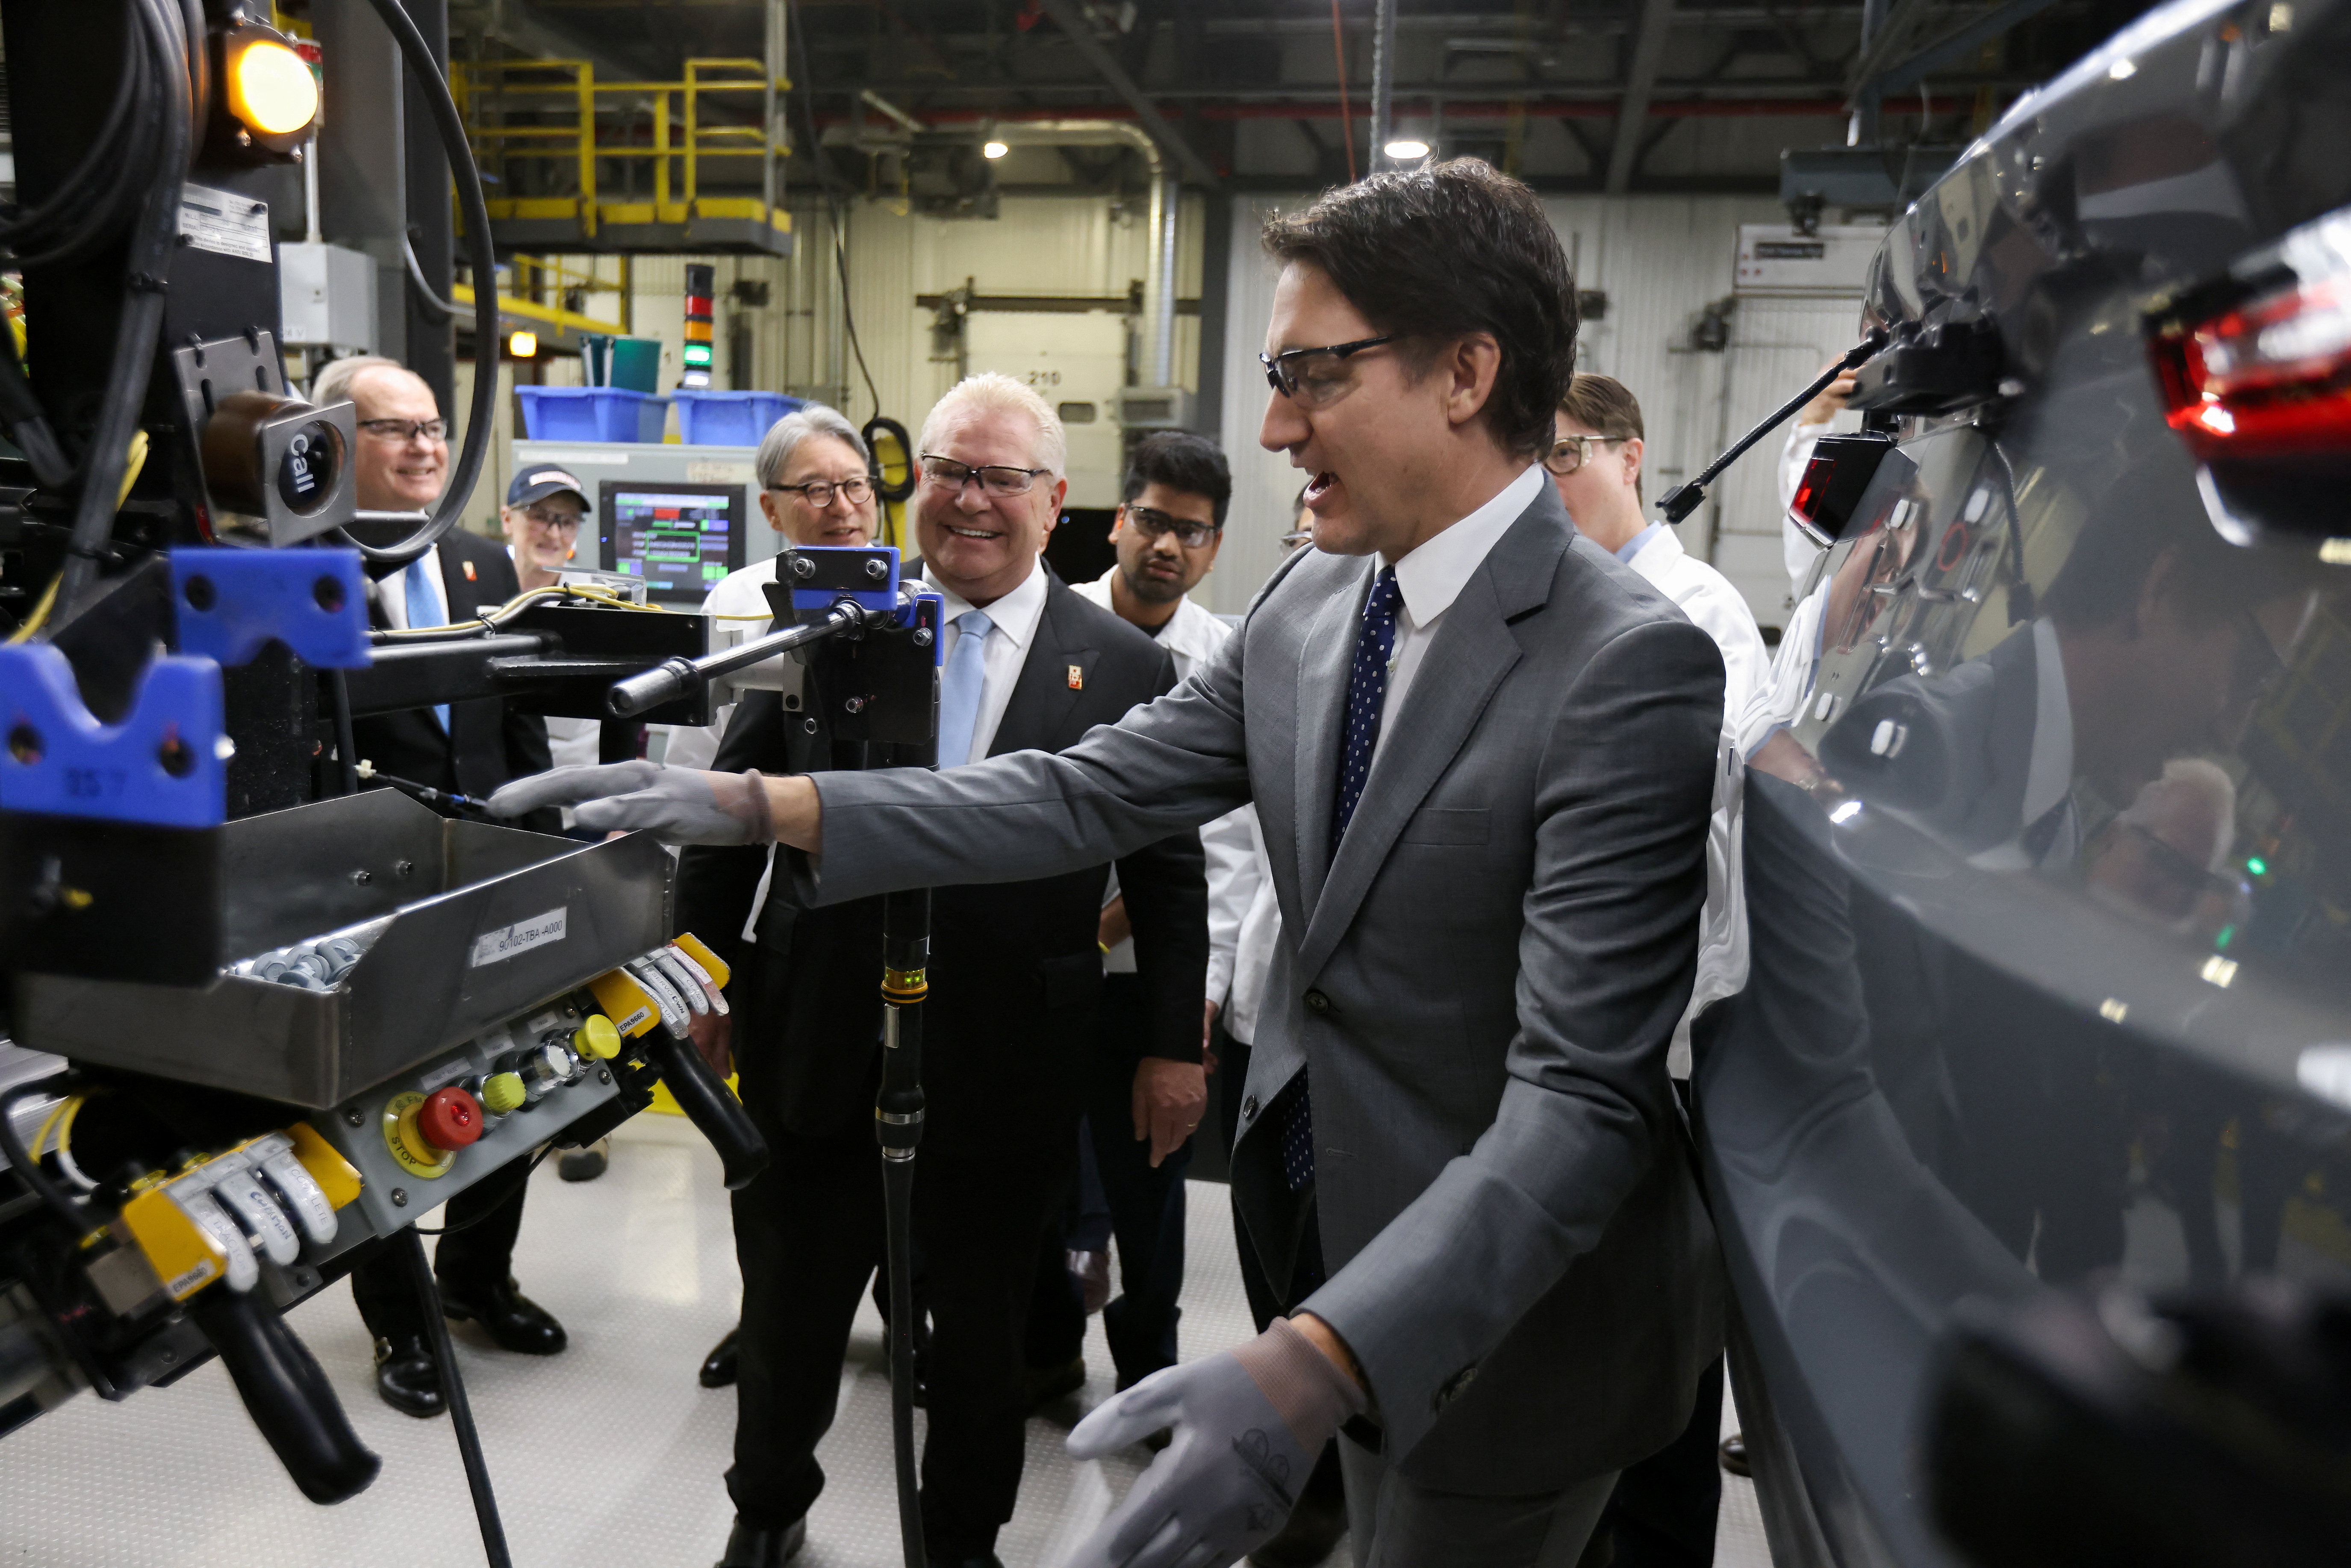 Honda announces plans to build electric vehicles and batteries in Ontario